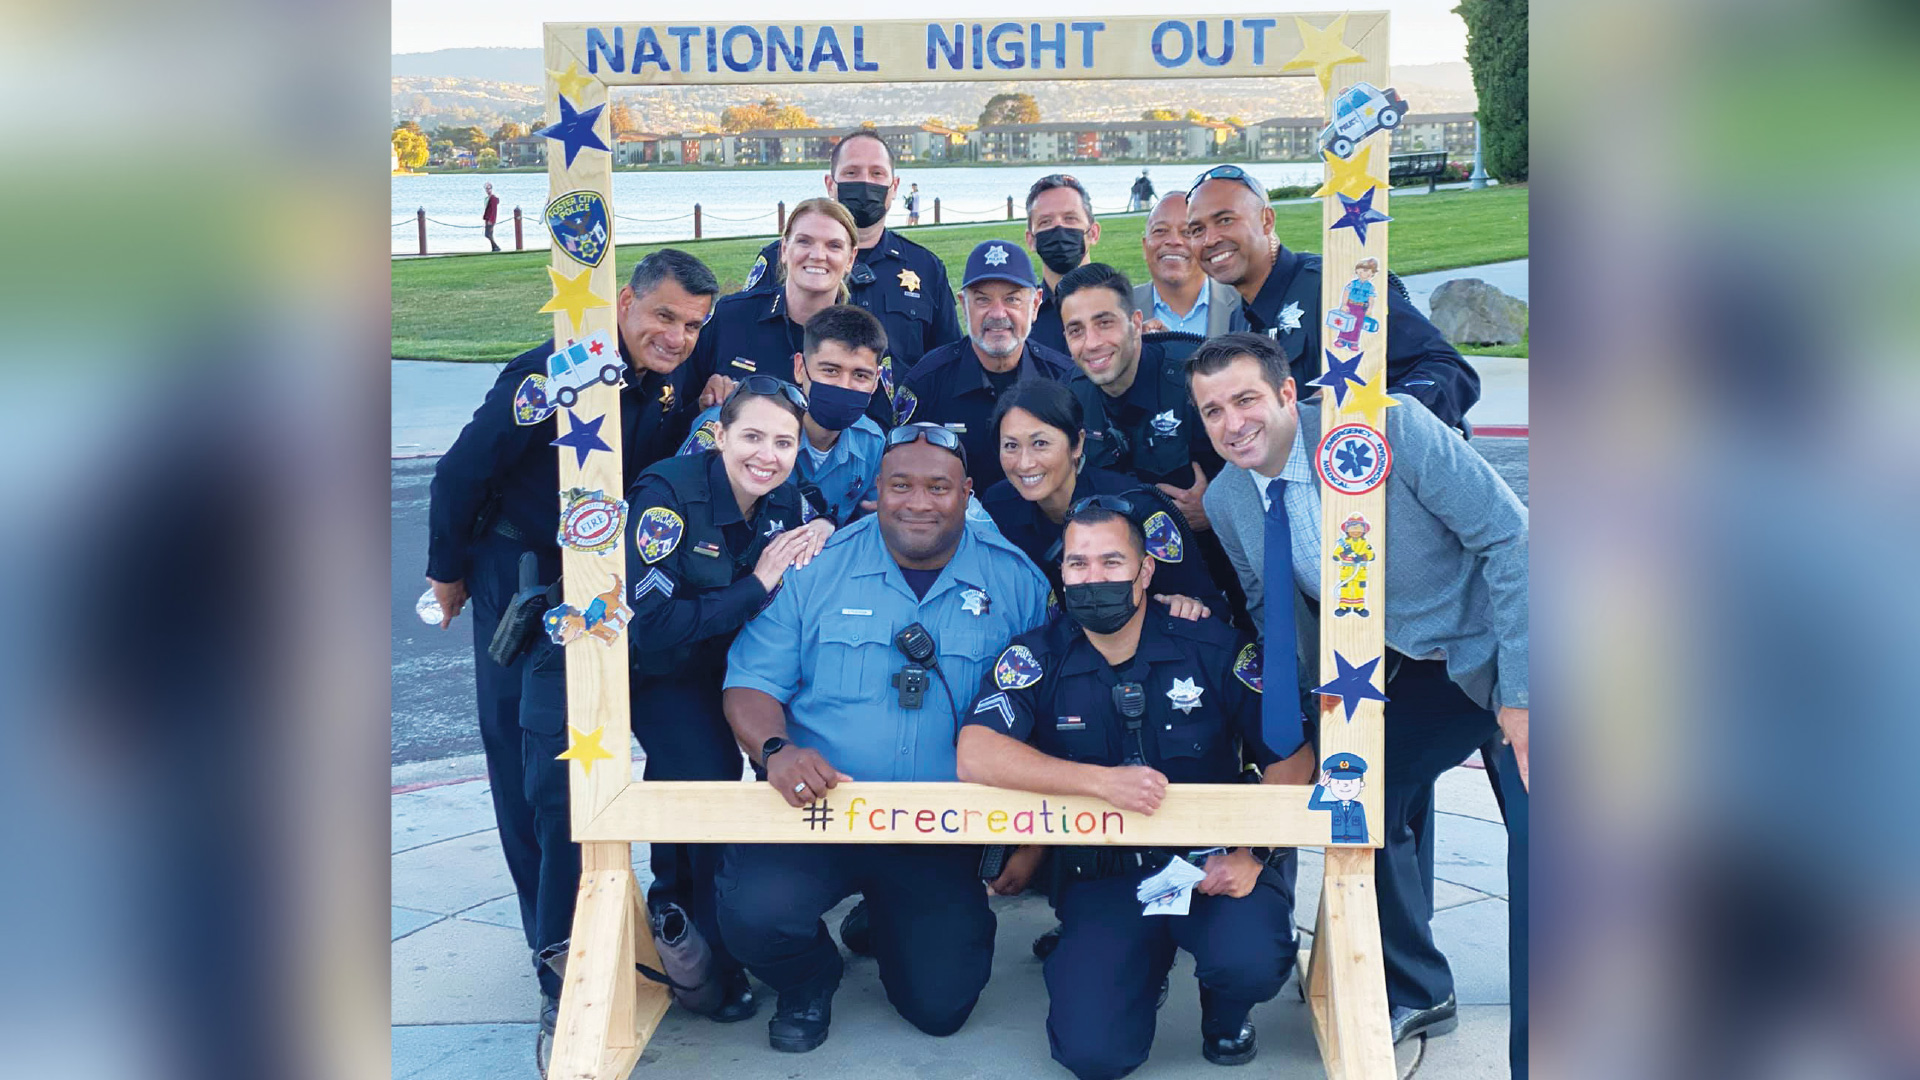 national-night-out-2021-1-foster-city-california-police-department